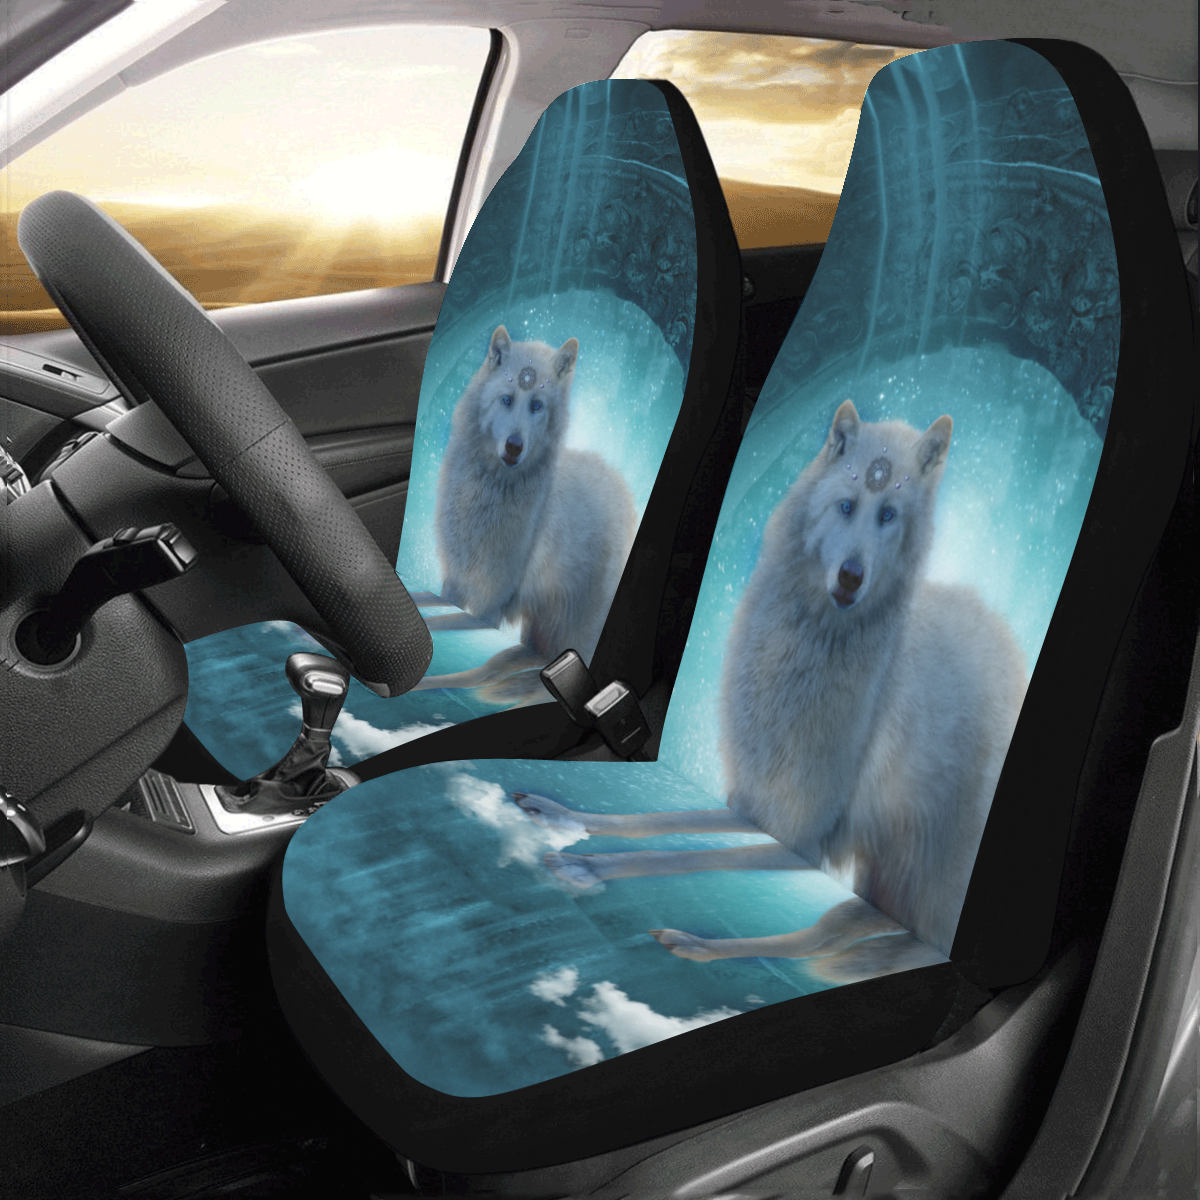 Wonderful white wolf in the night Car Seat Covers (Set of 2)